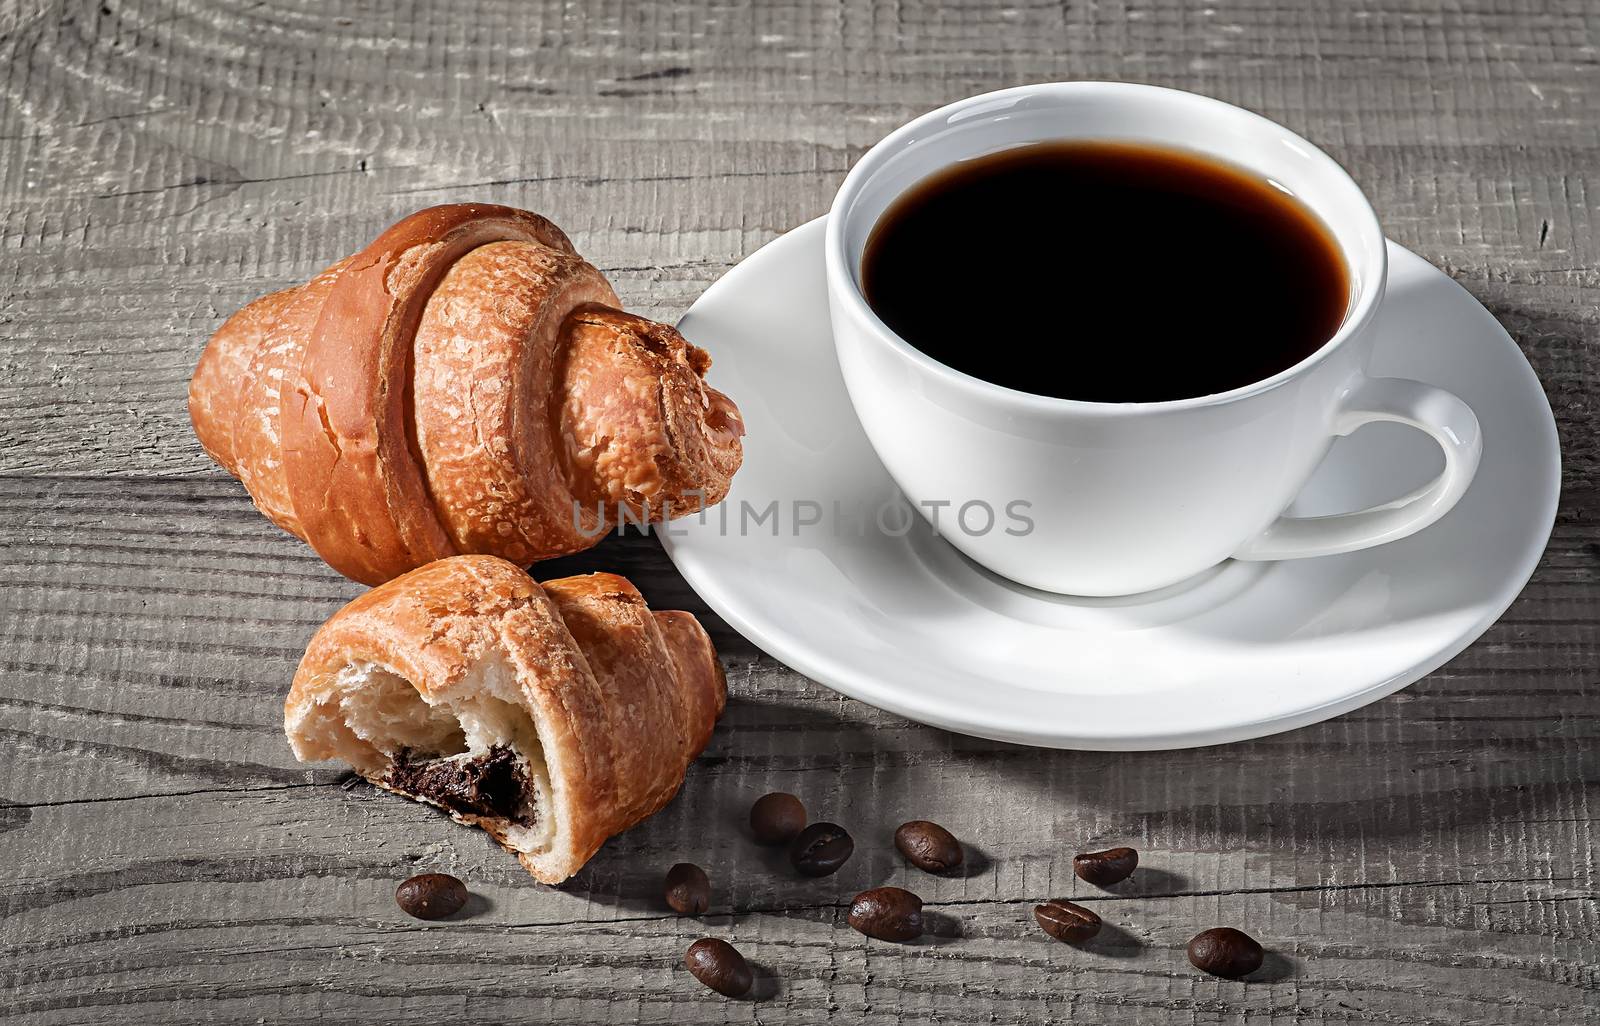 Coffee and croissants on a wooden table. Broken croissant and coffee beans nearby.